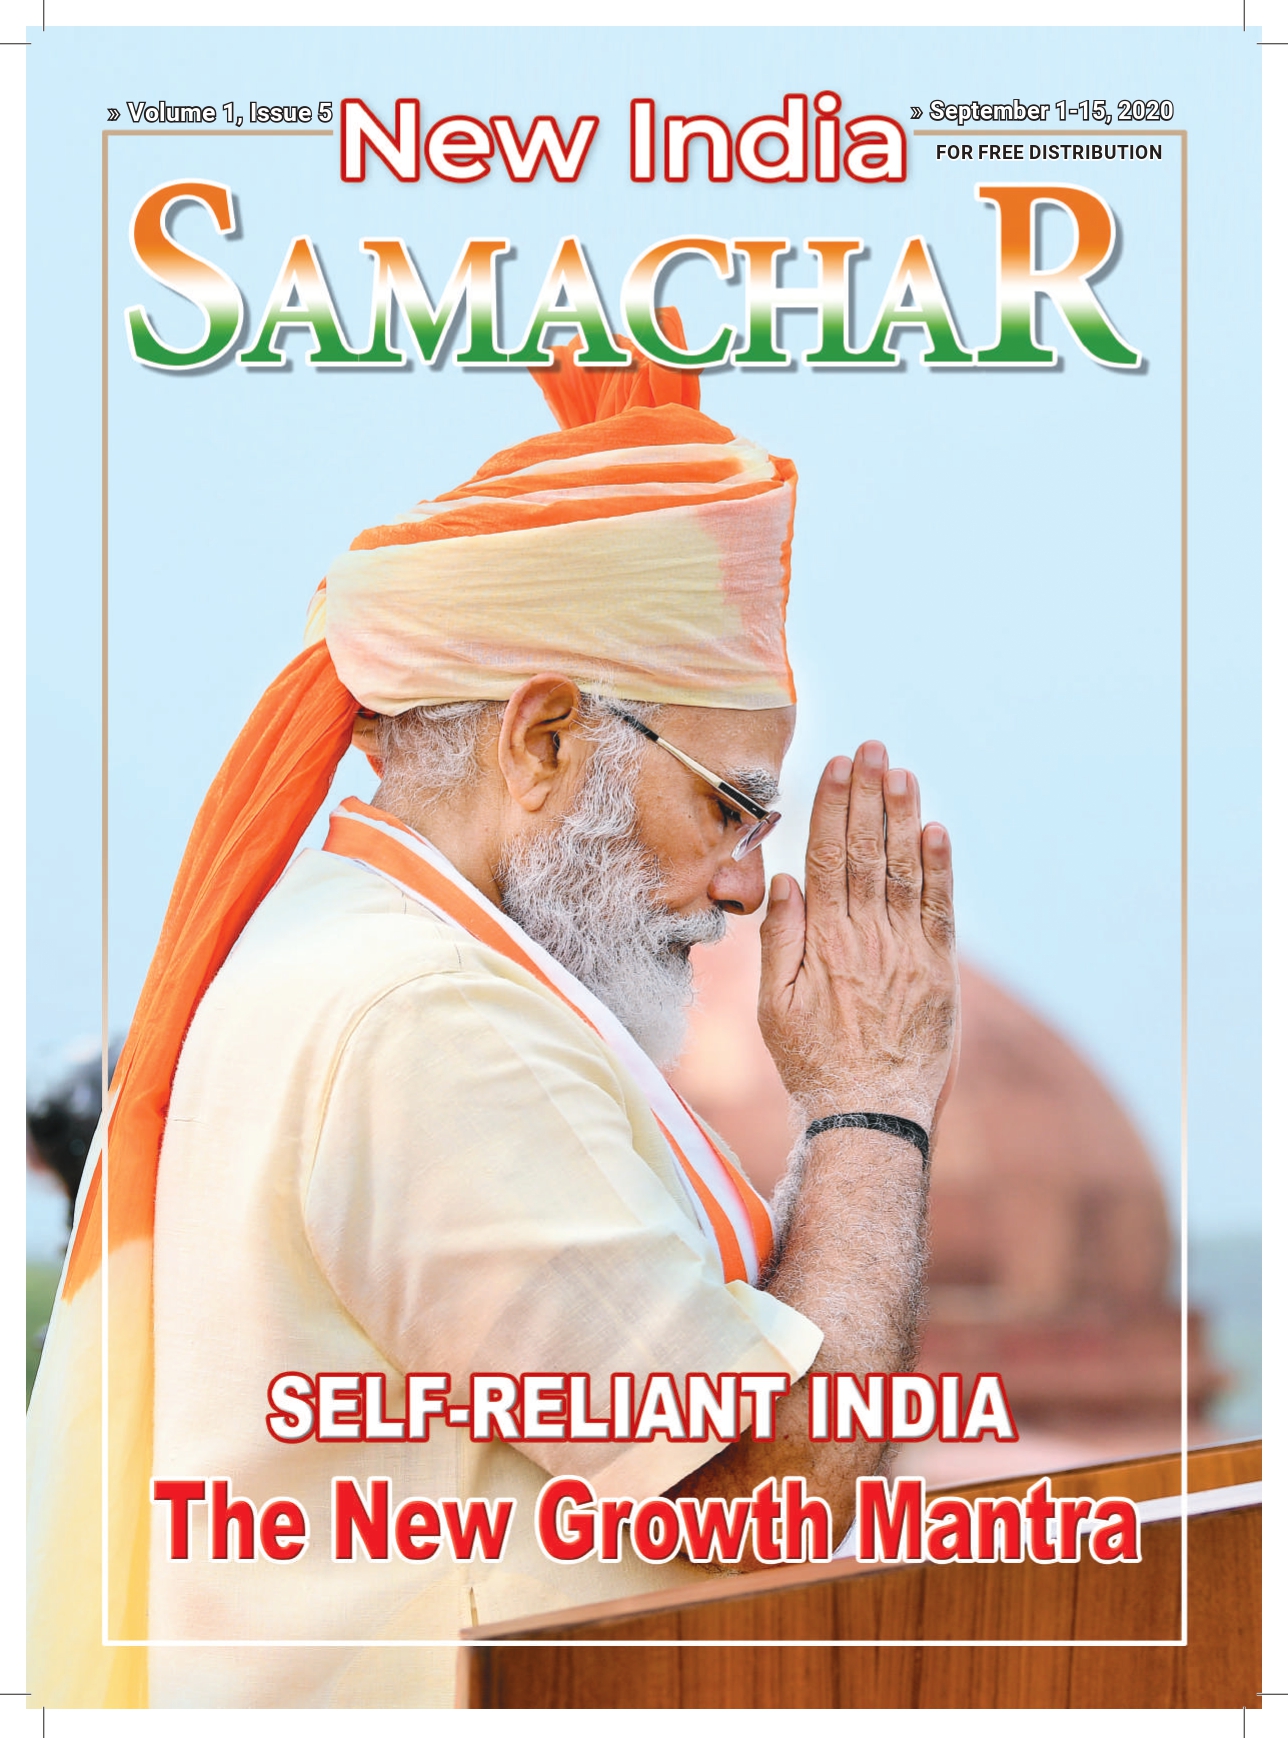 Image of Self-Reliant India The New Growth Mantra